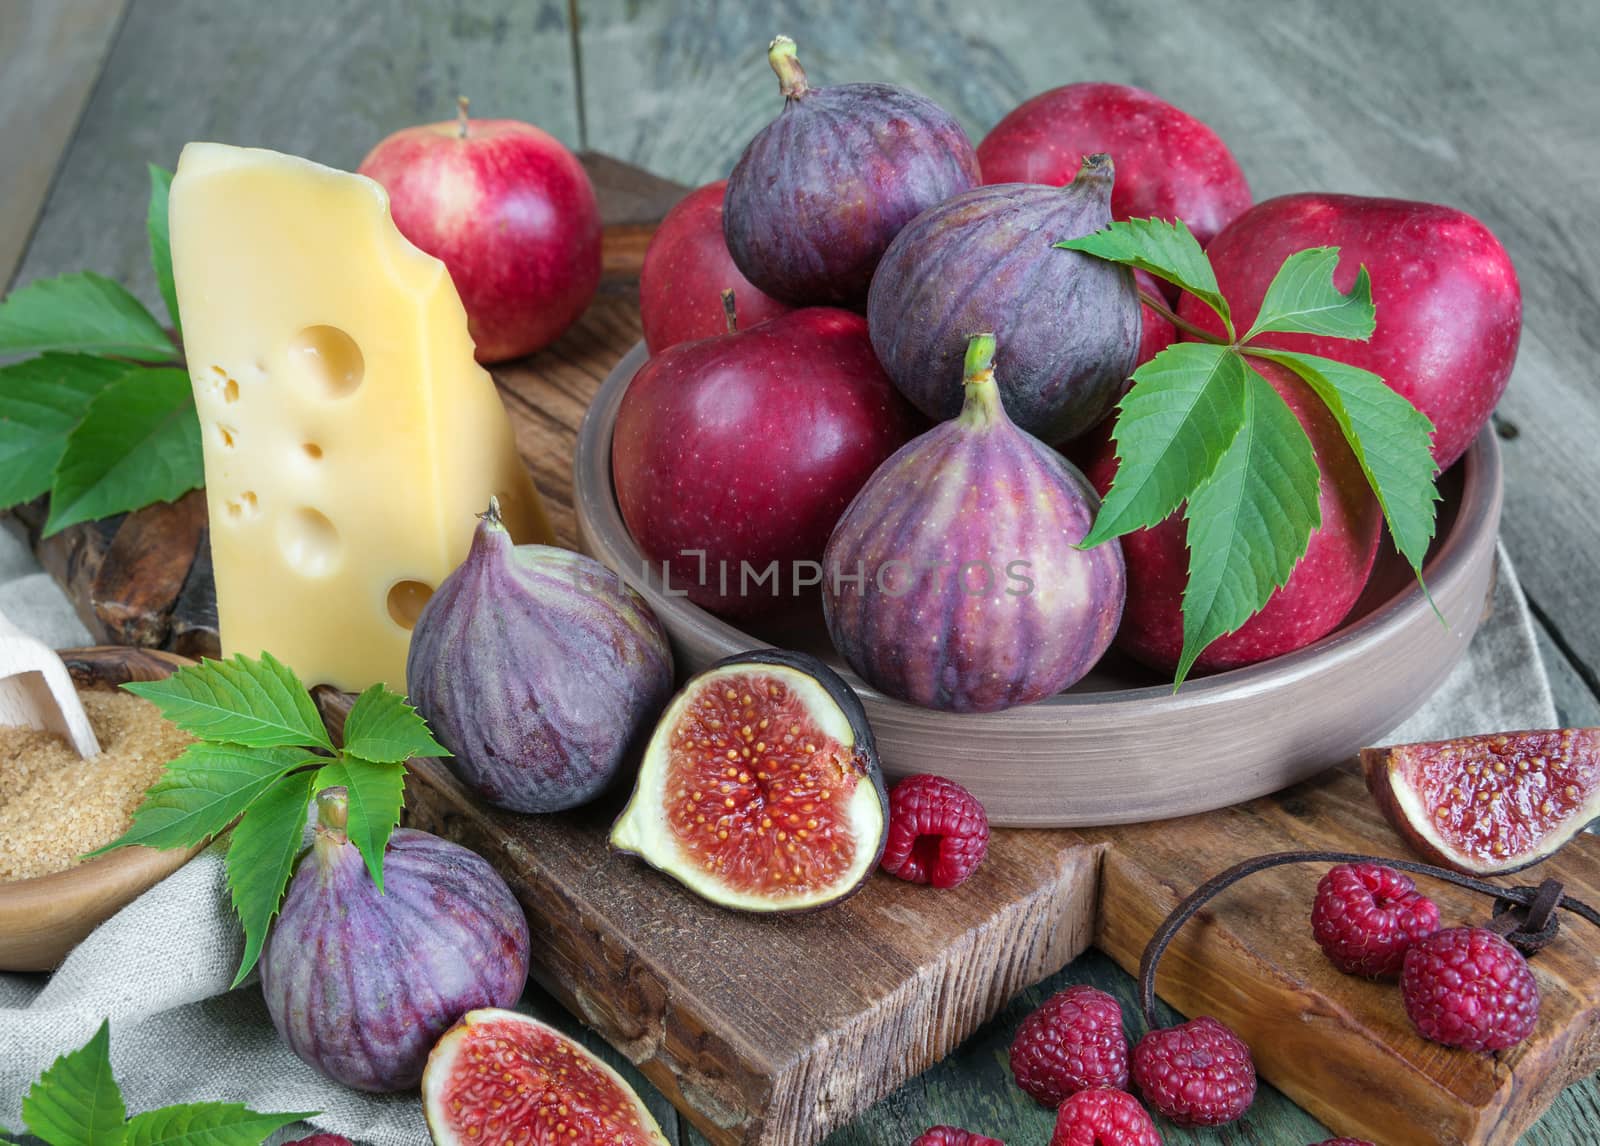 Ripe figs, red raspberry and apples, cane sugar and cheese are on old cutting board as well as green leaves lie on the old wooden table